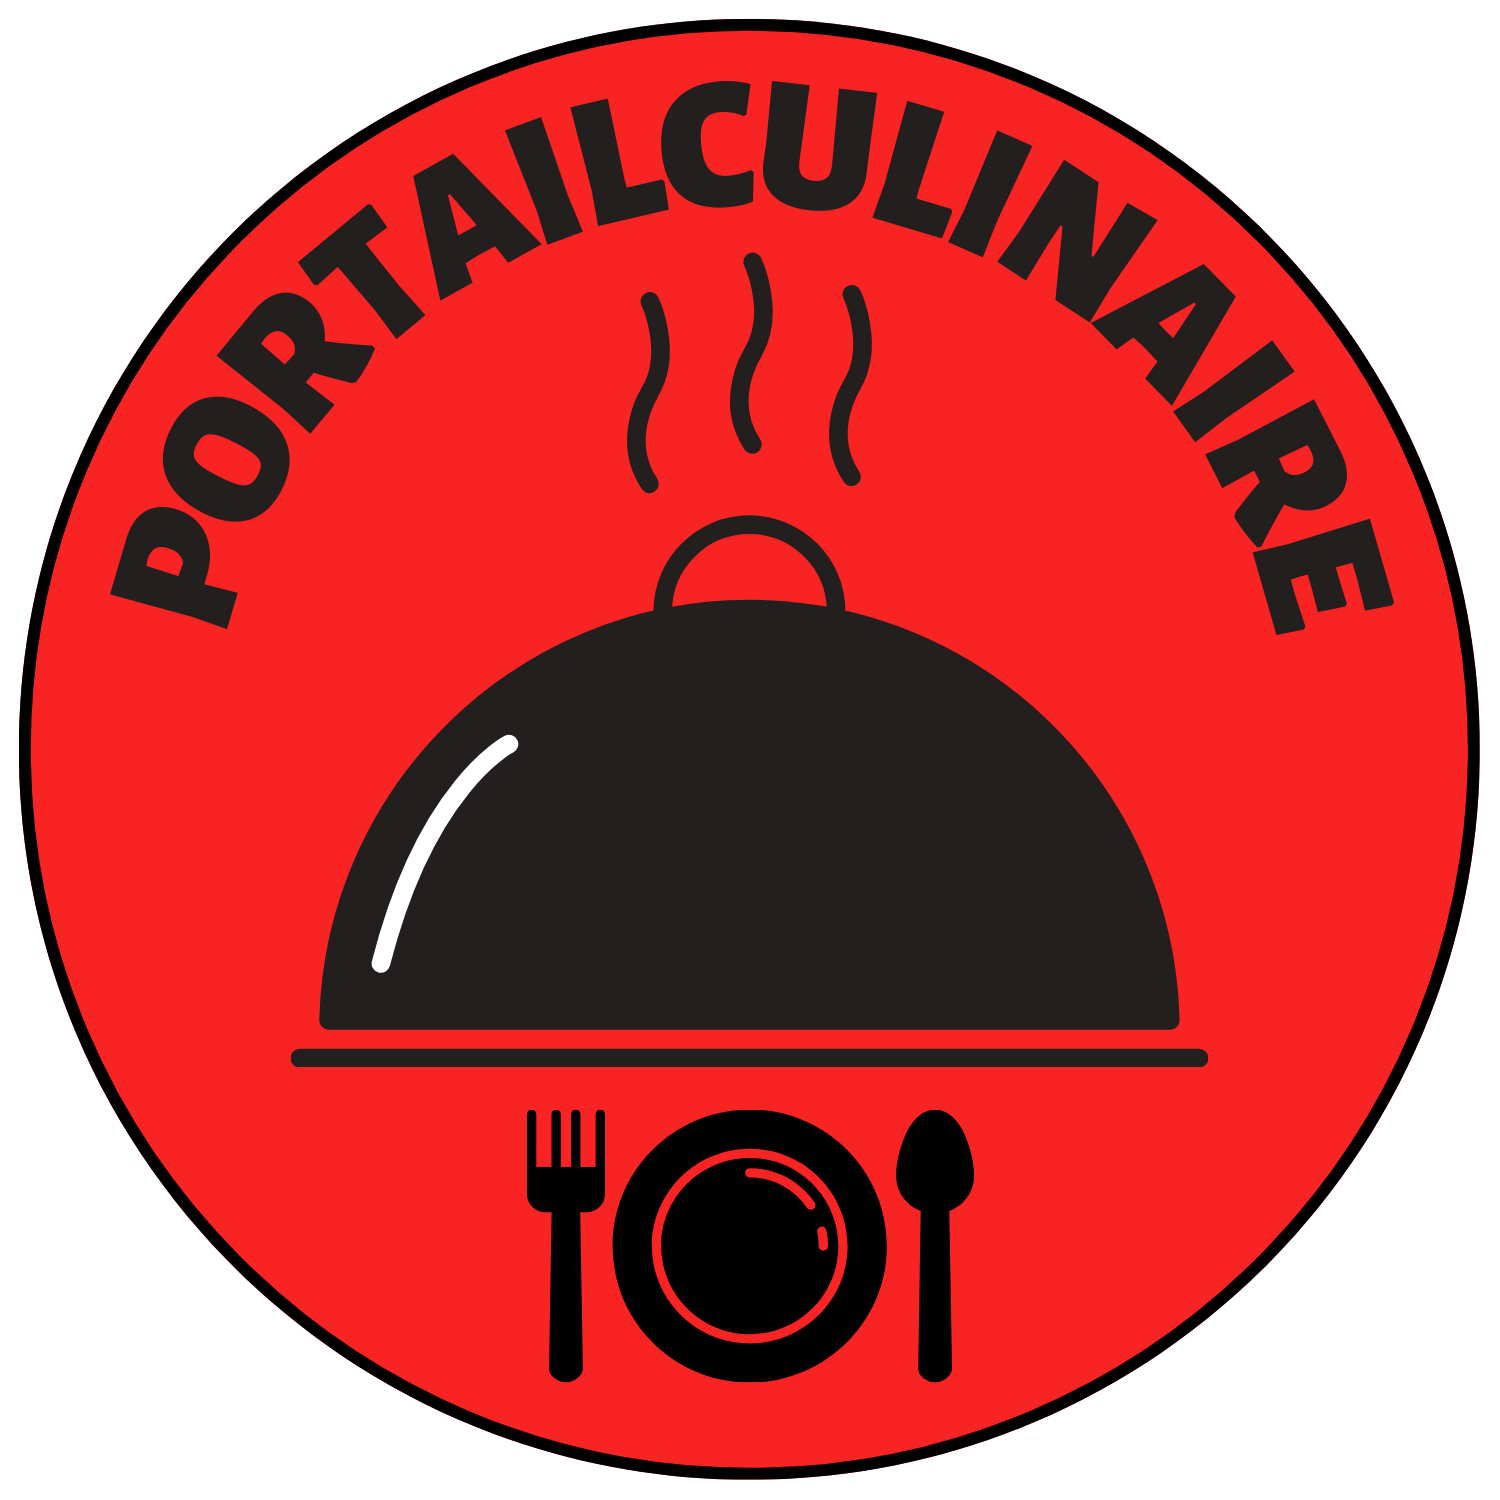 PortailCulinaire